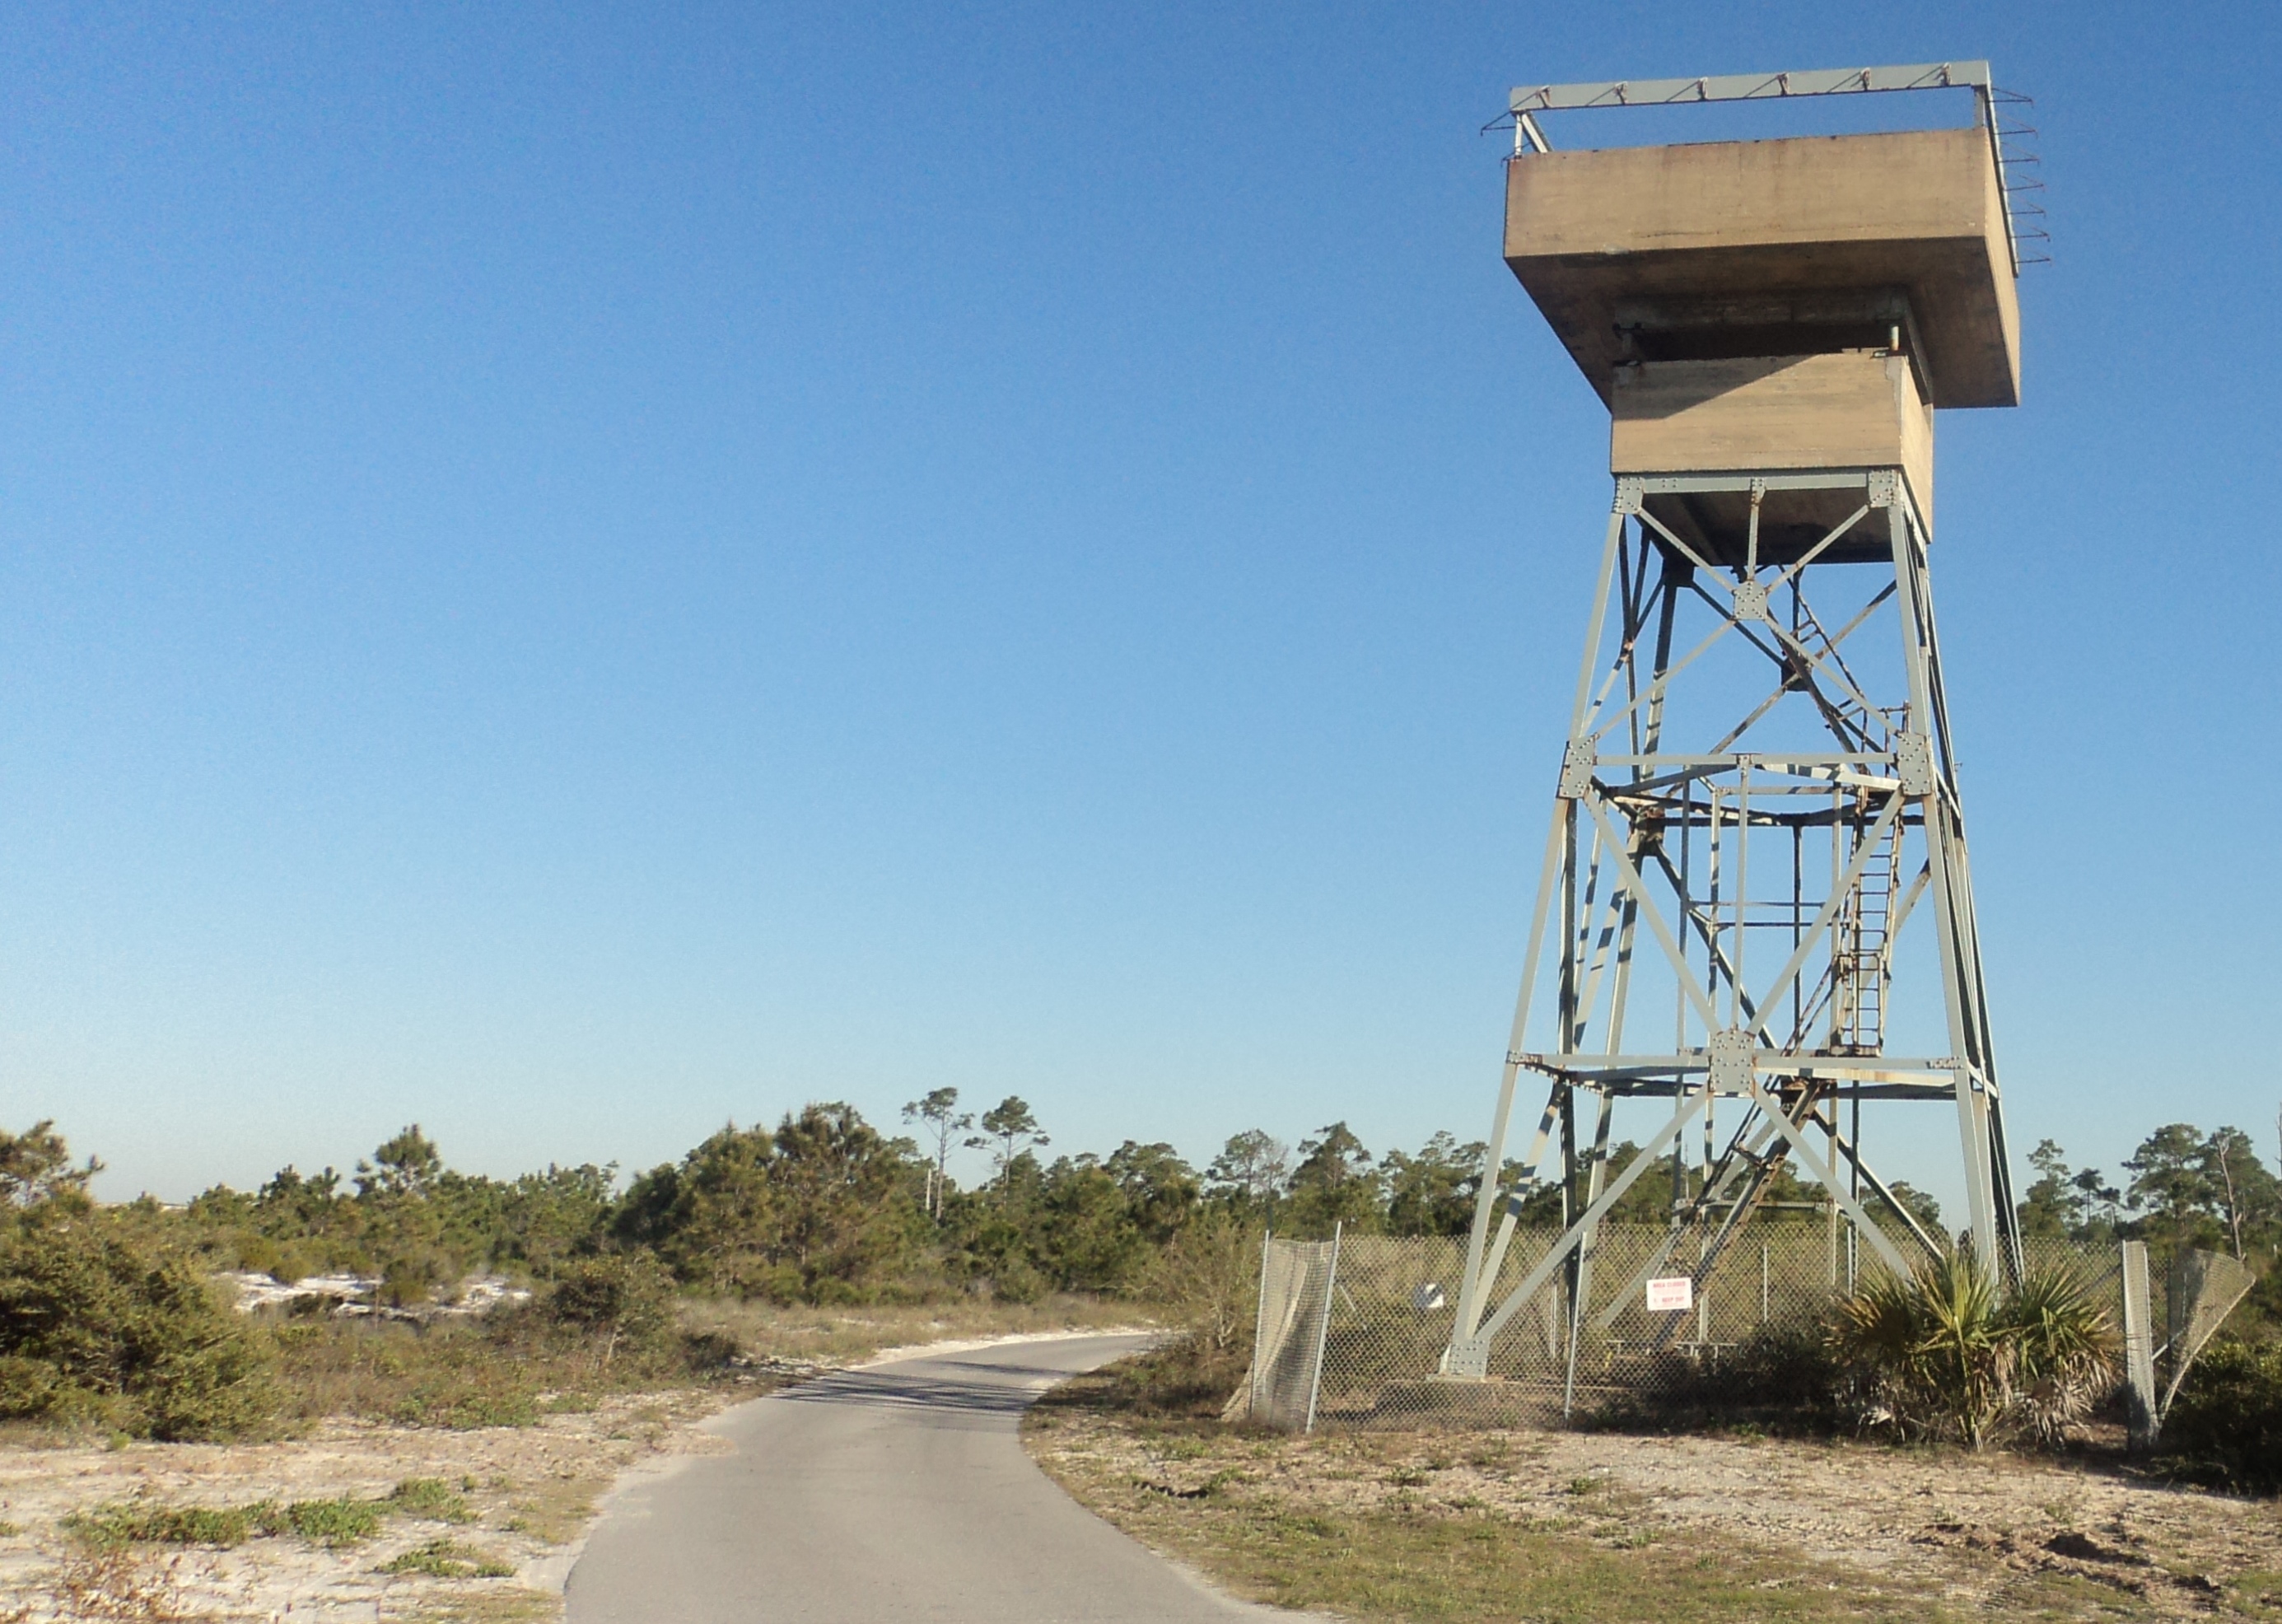 A steel and concrete tower stand near a one lane asphalt road.